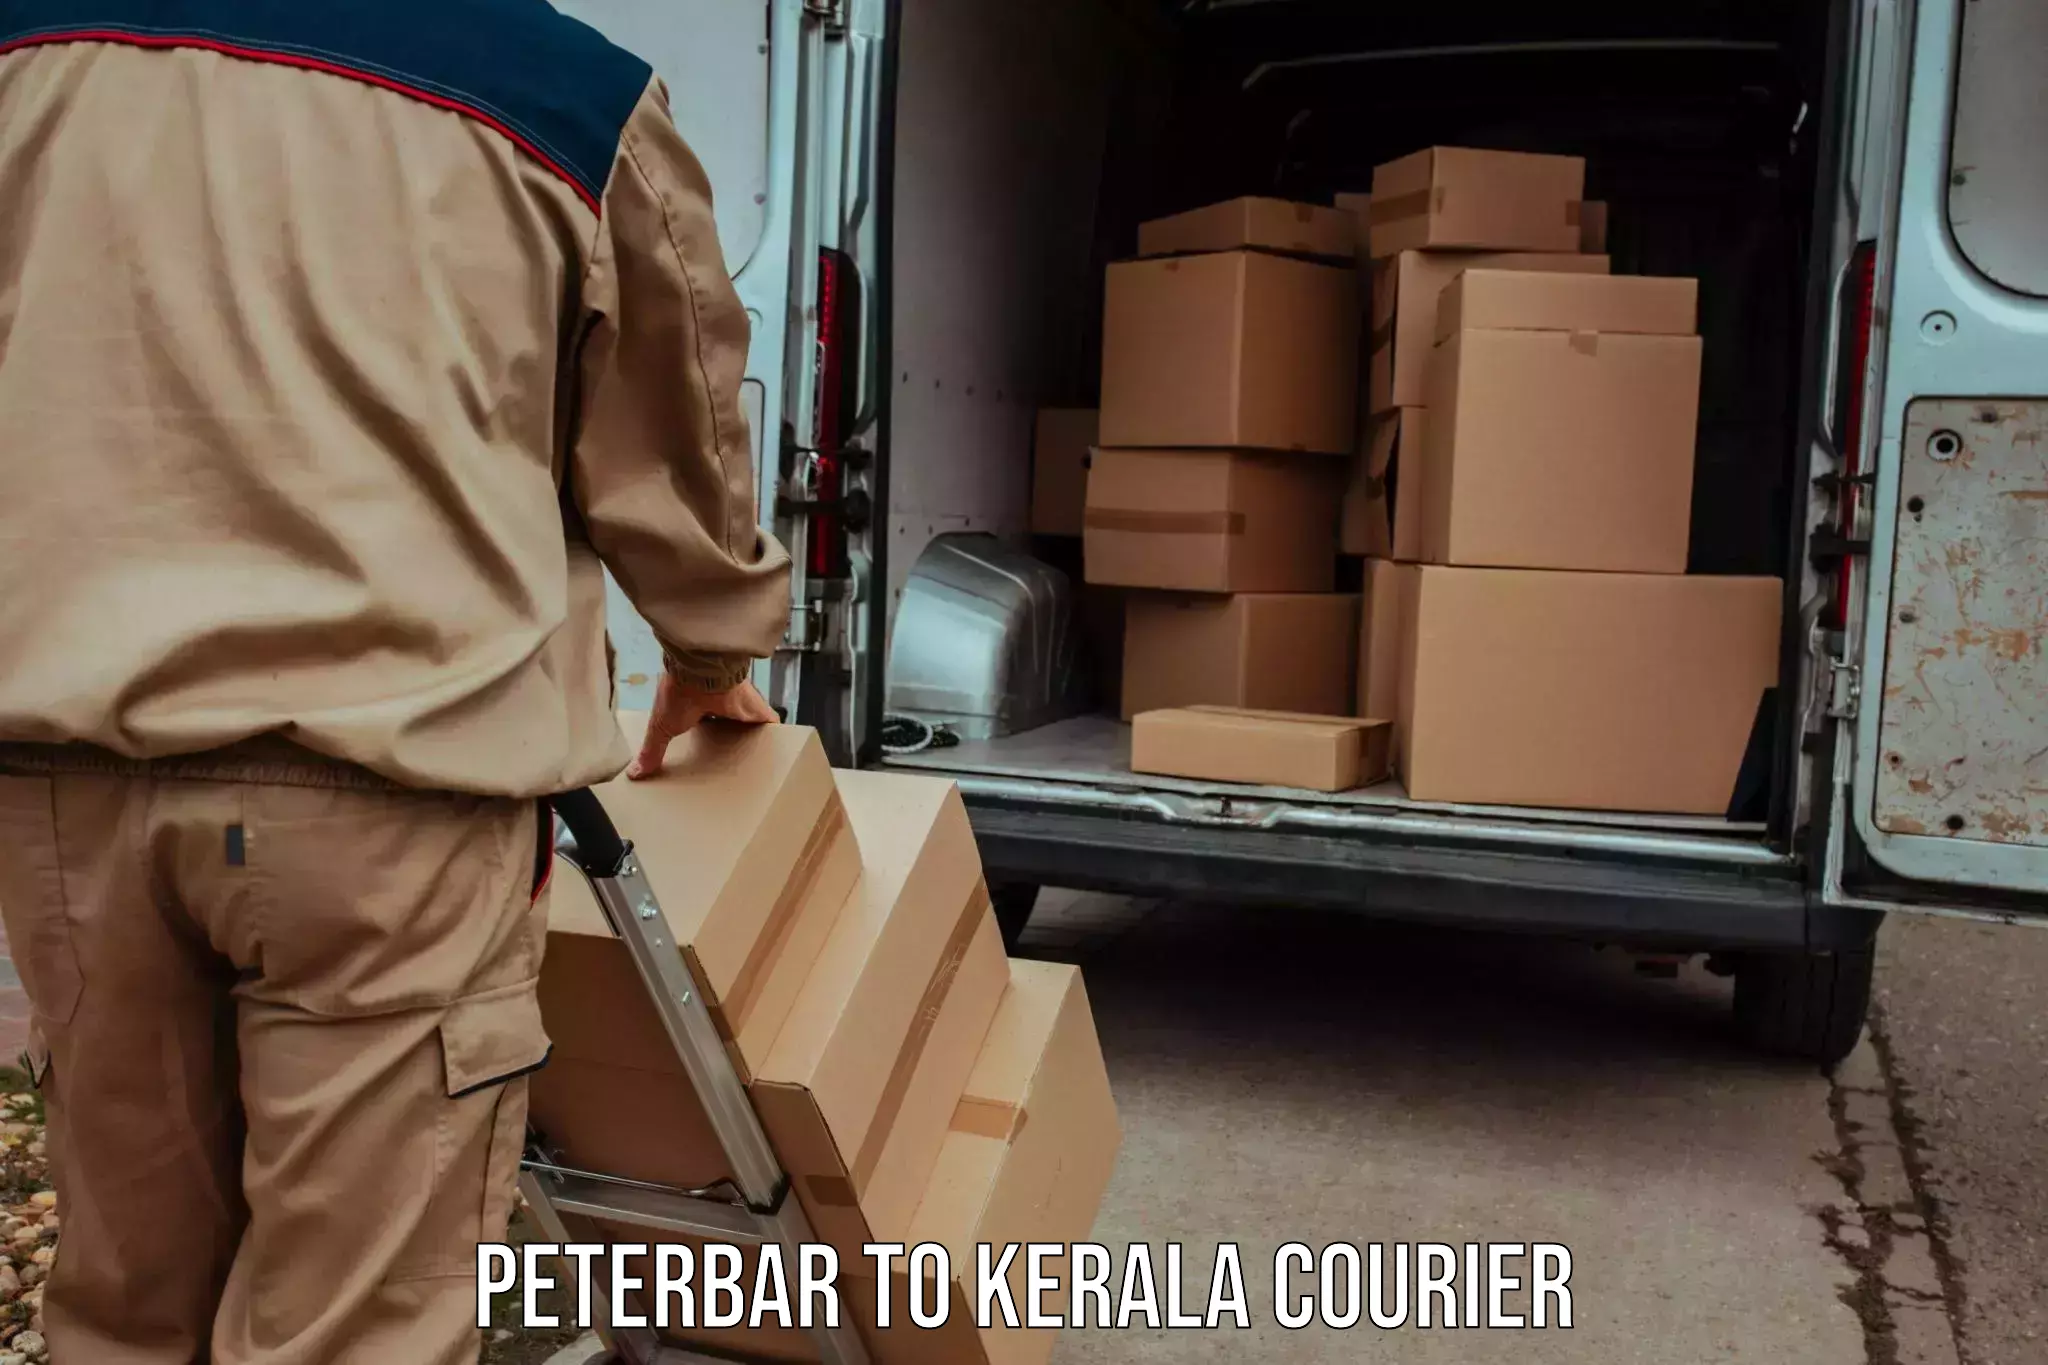 Courier service comparison Peterbar to Angamaly